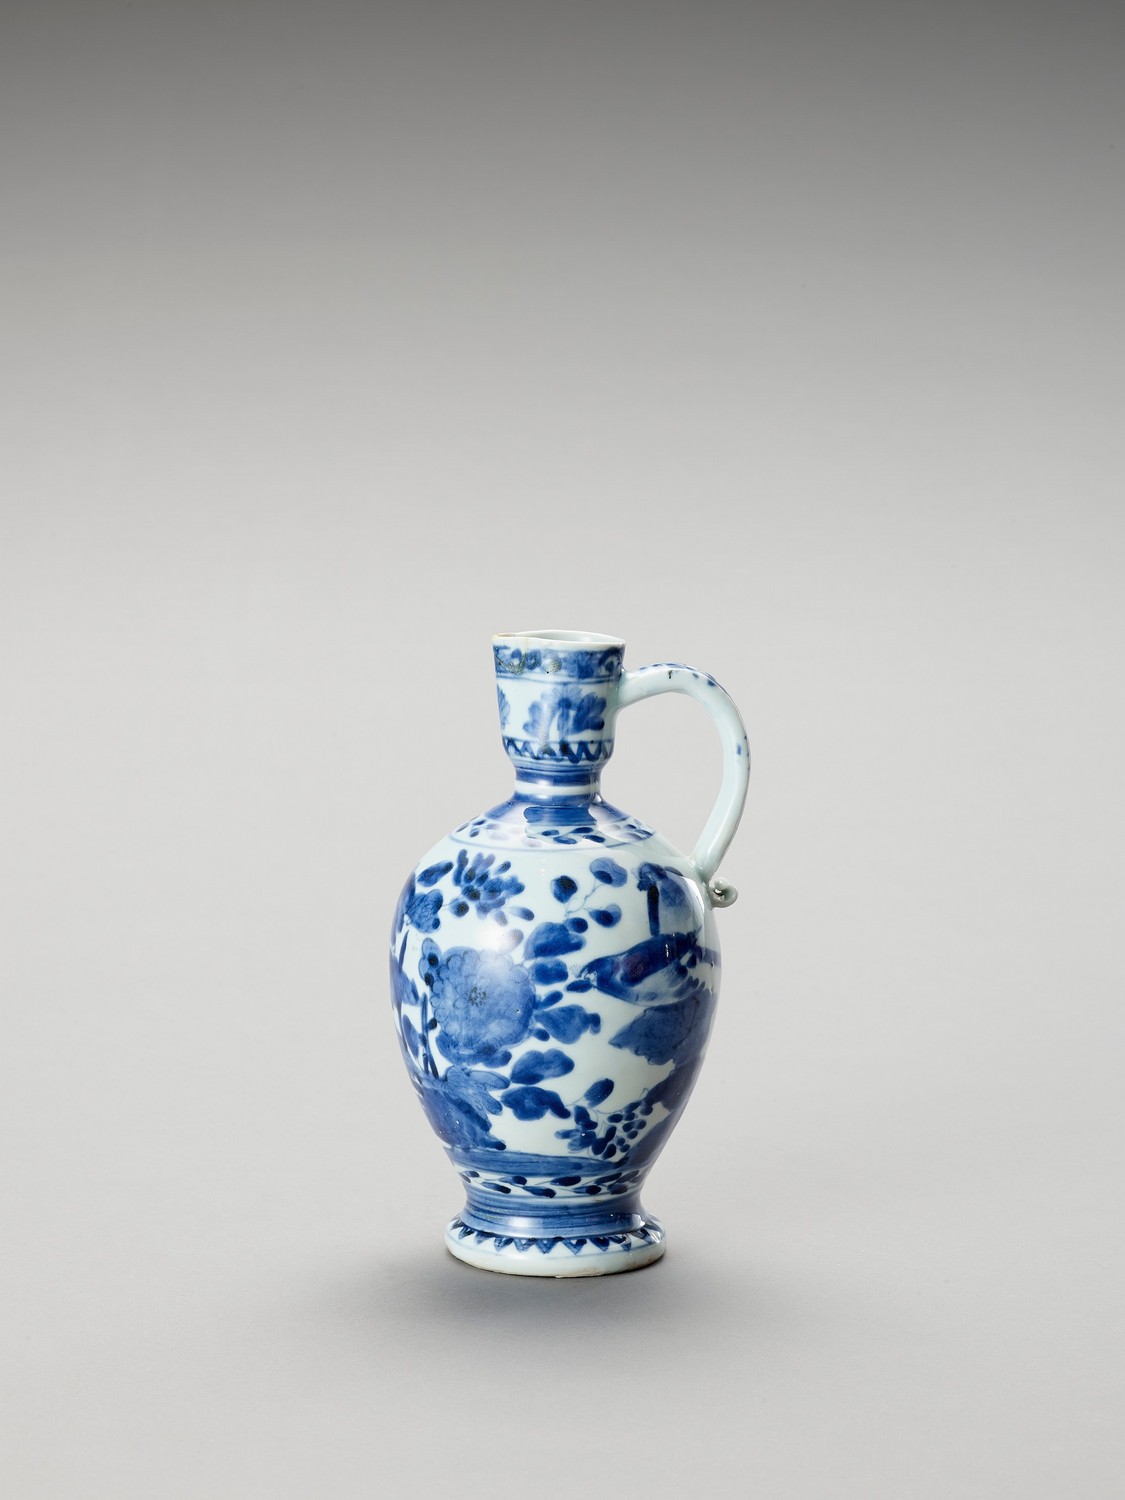 A BLUE AND WHITE PORCELAIN JUG - Image 5 of 7